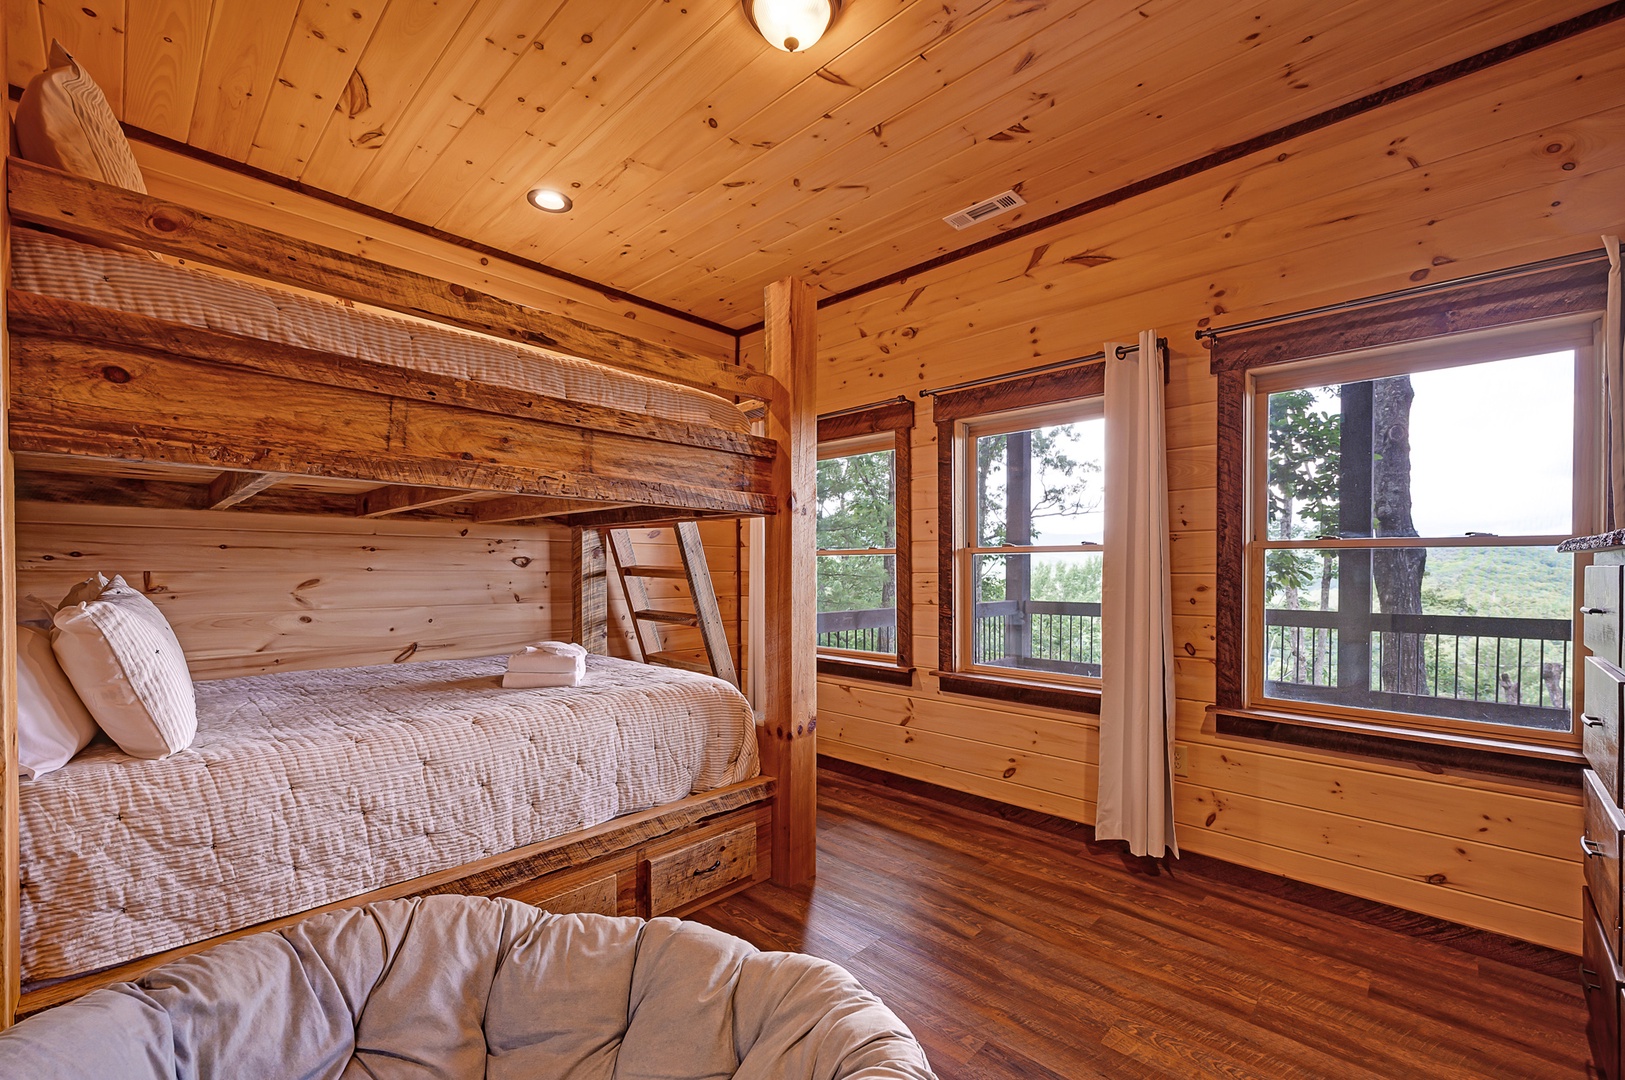 Feather & Fawn Lodge- Lower level bunk room with mountain views